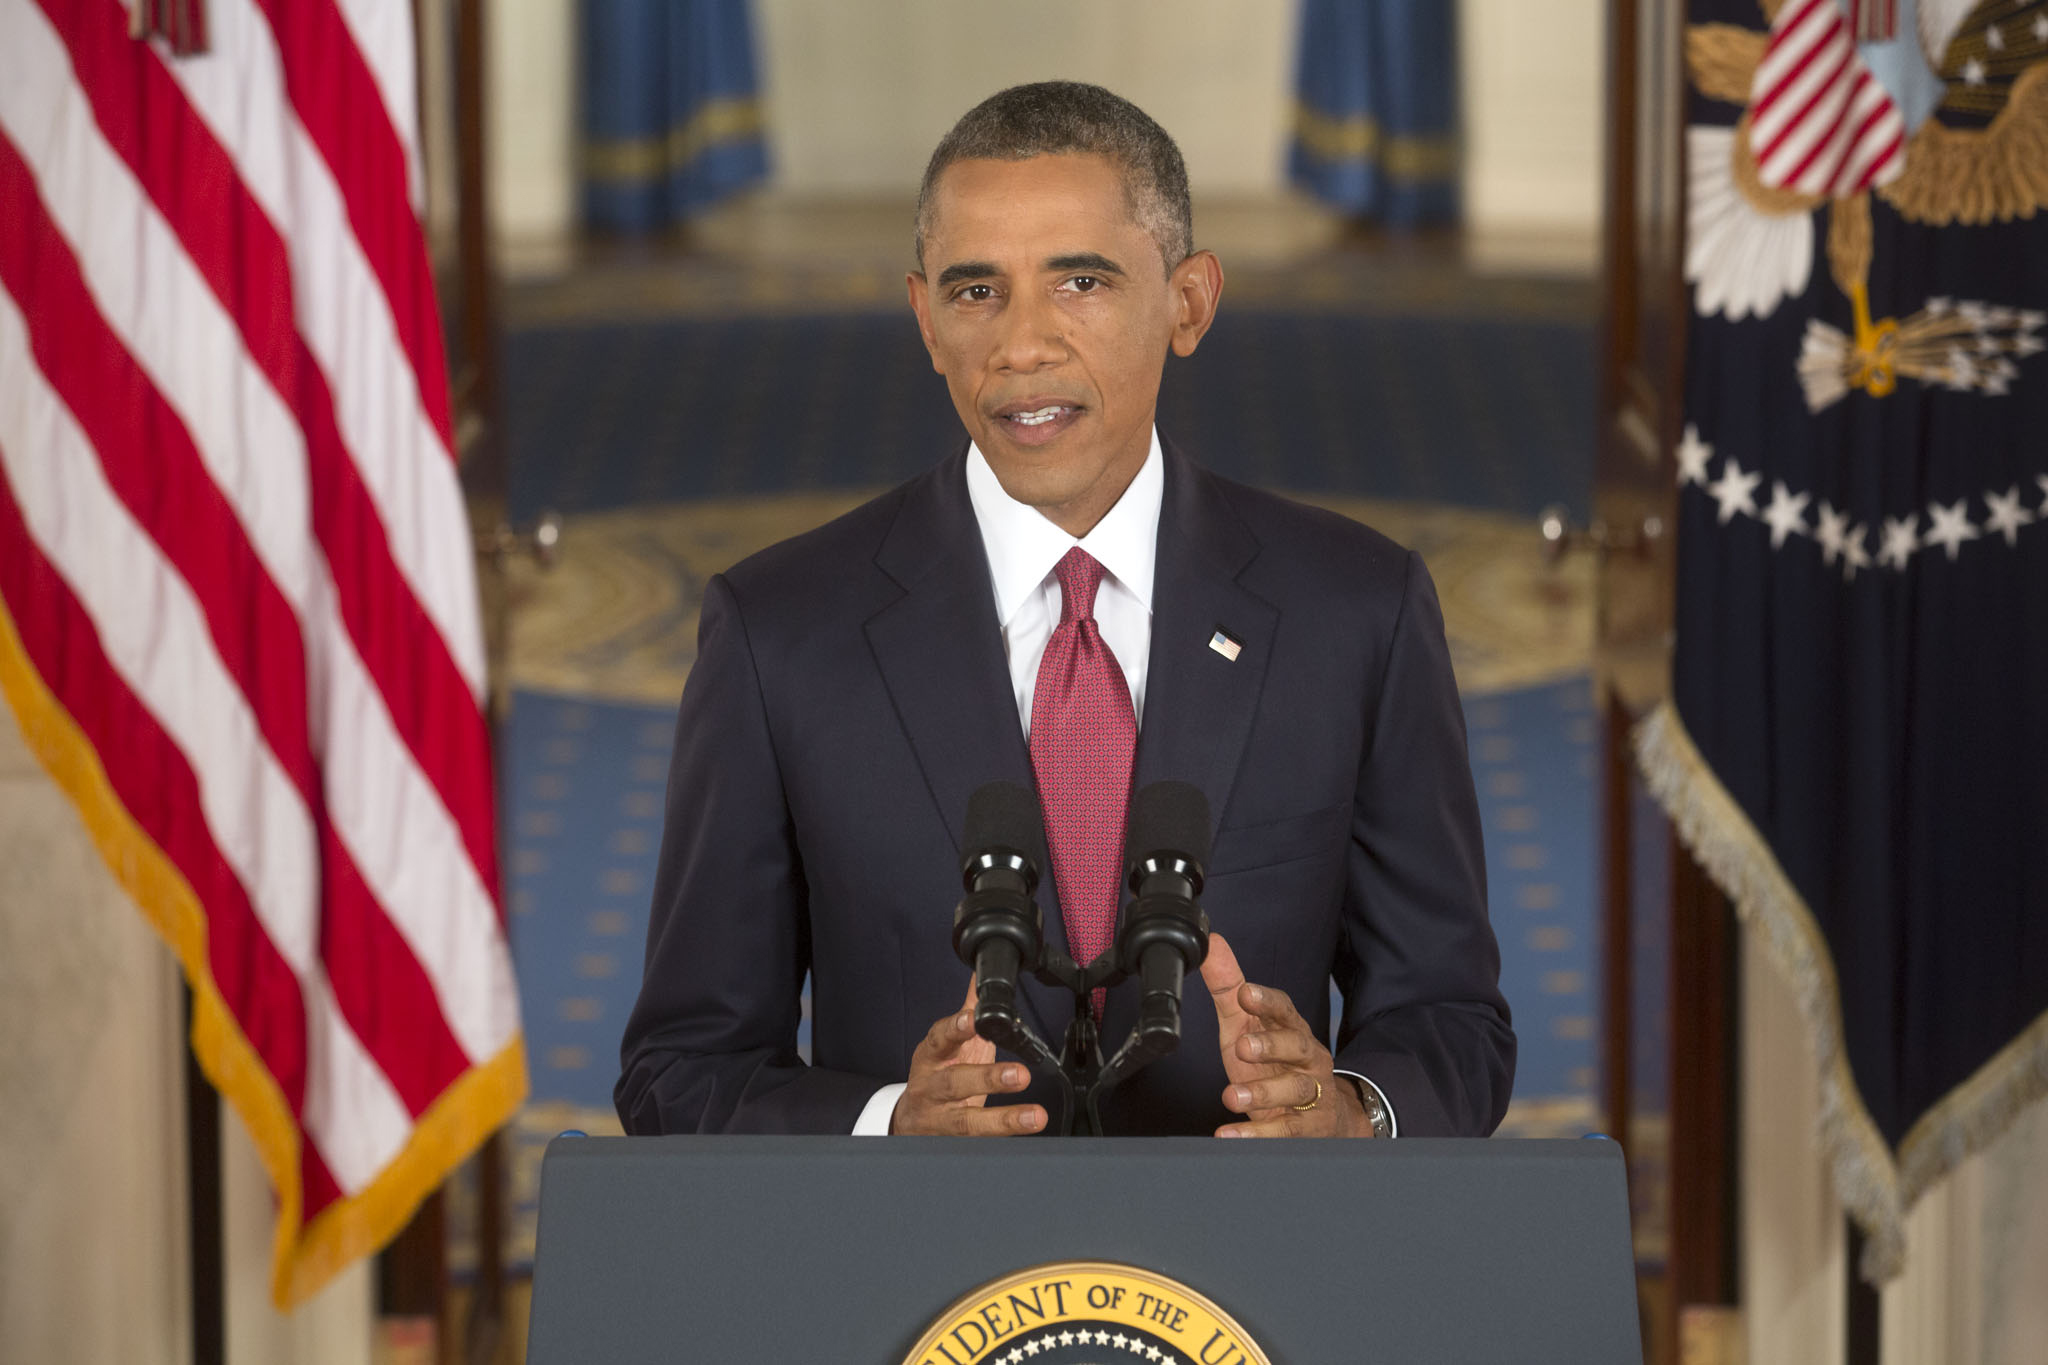 President Obama delivers an address to the nation on the U.S. Counterterrorism strategy to combat ISIL